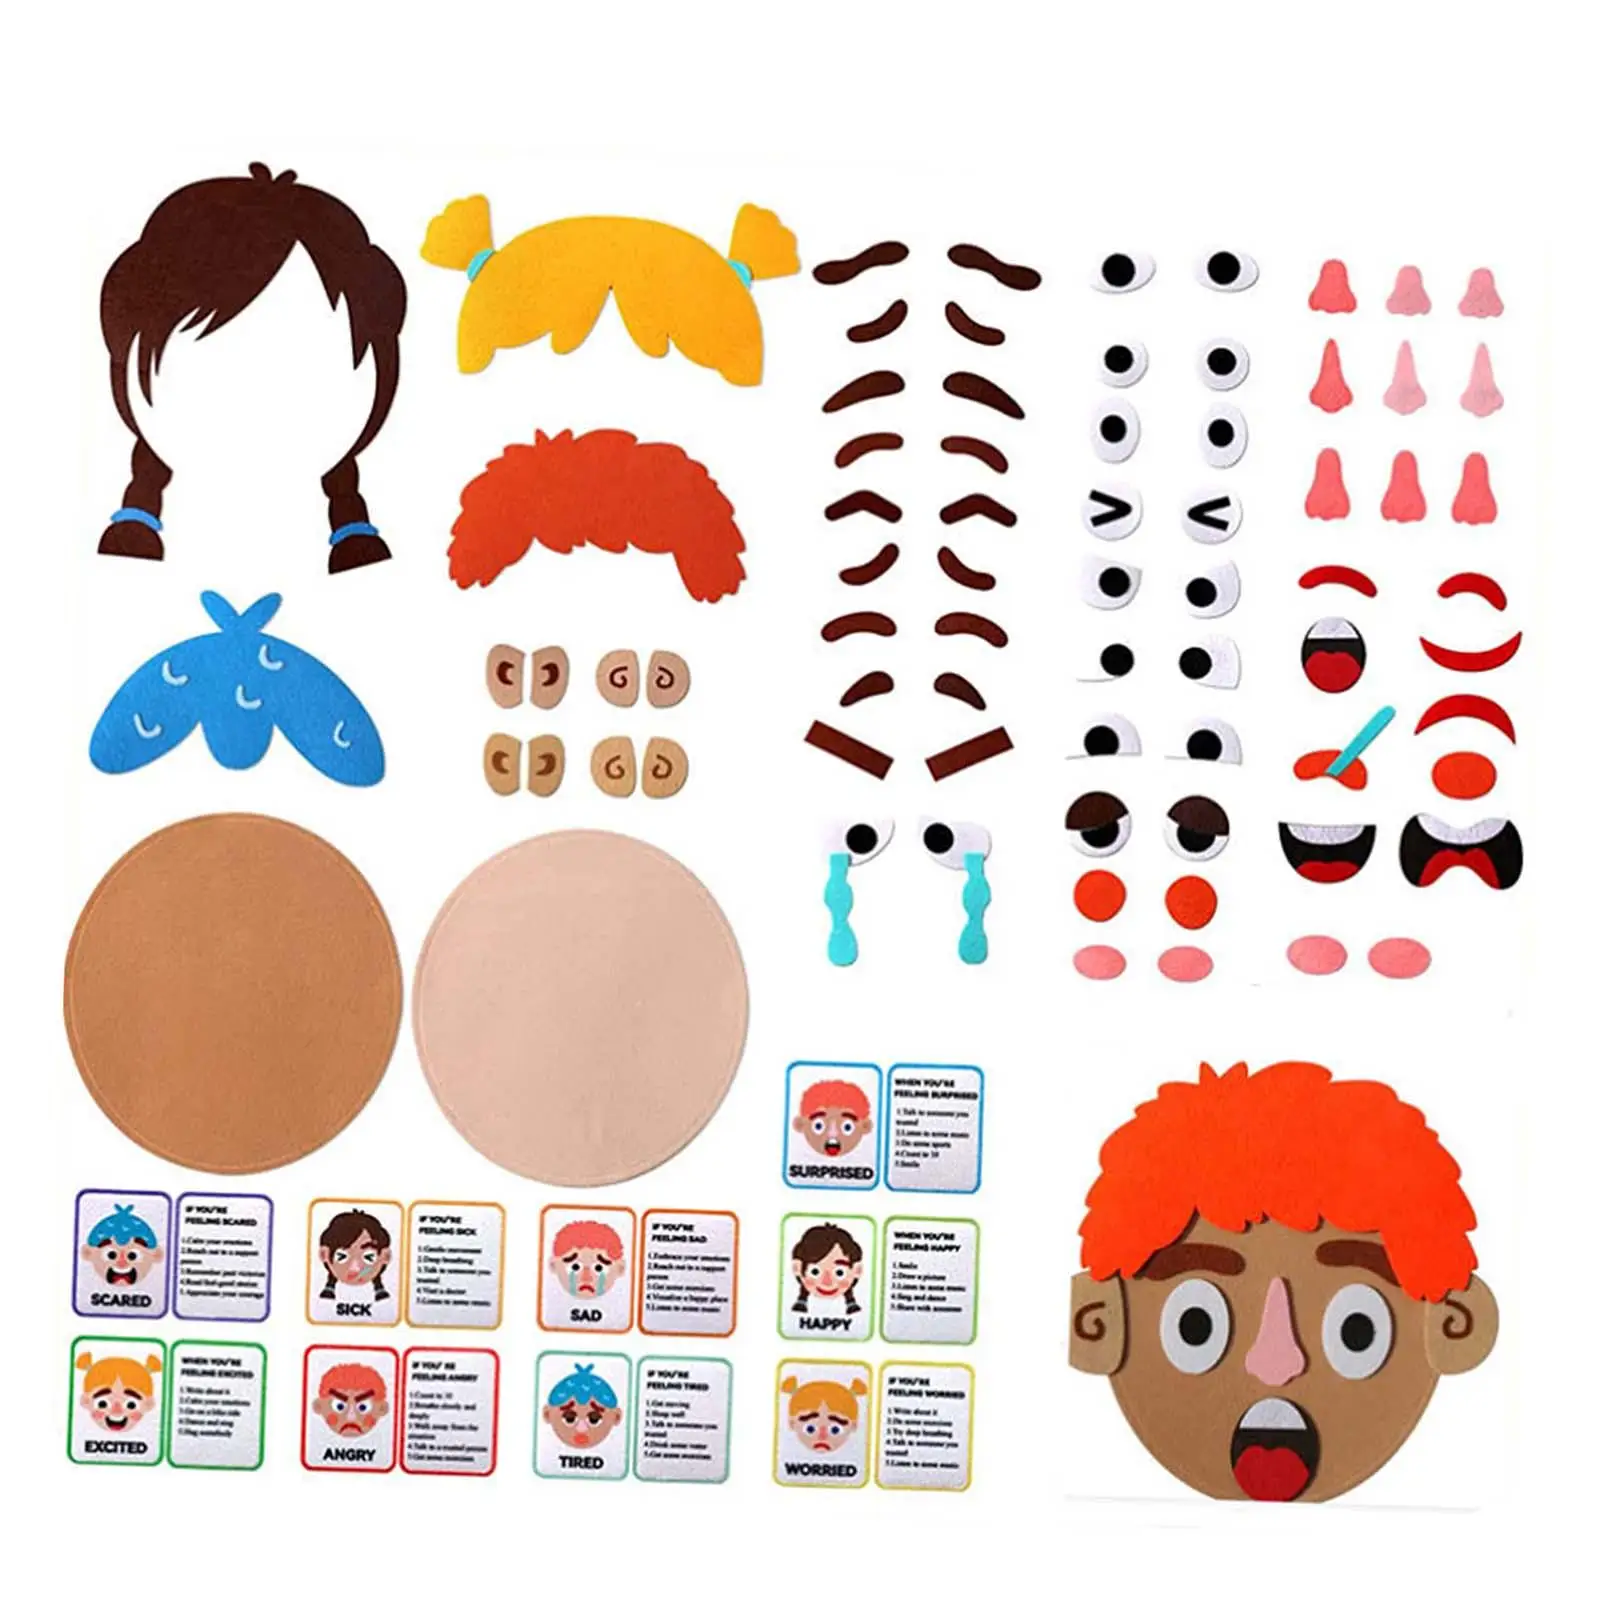 Kids Social Emotional Learning Learning Preschool Faces Stickers Games Educational Toy for Girls Toddlers Children Kids Ages 3+